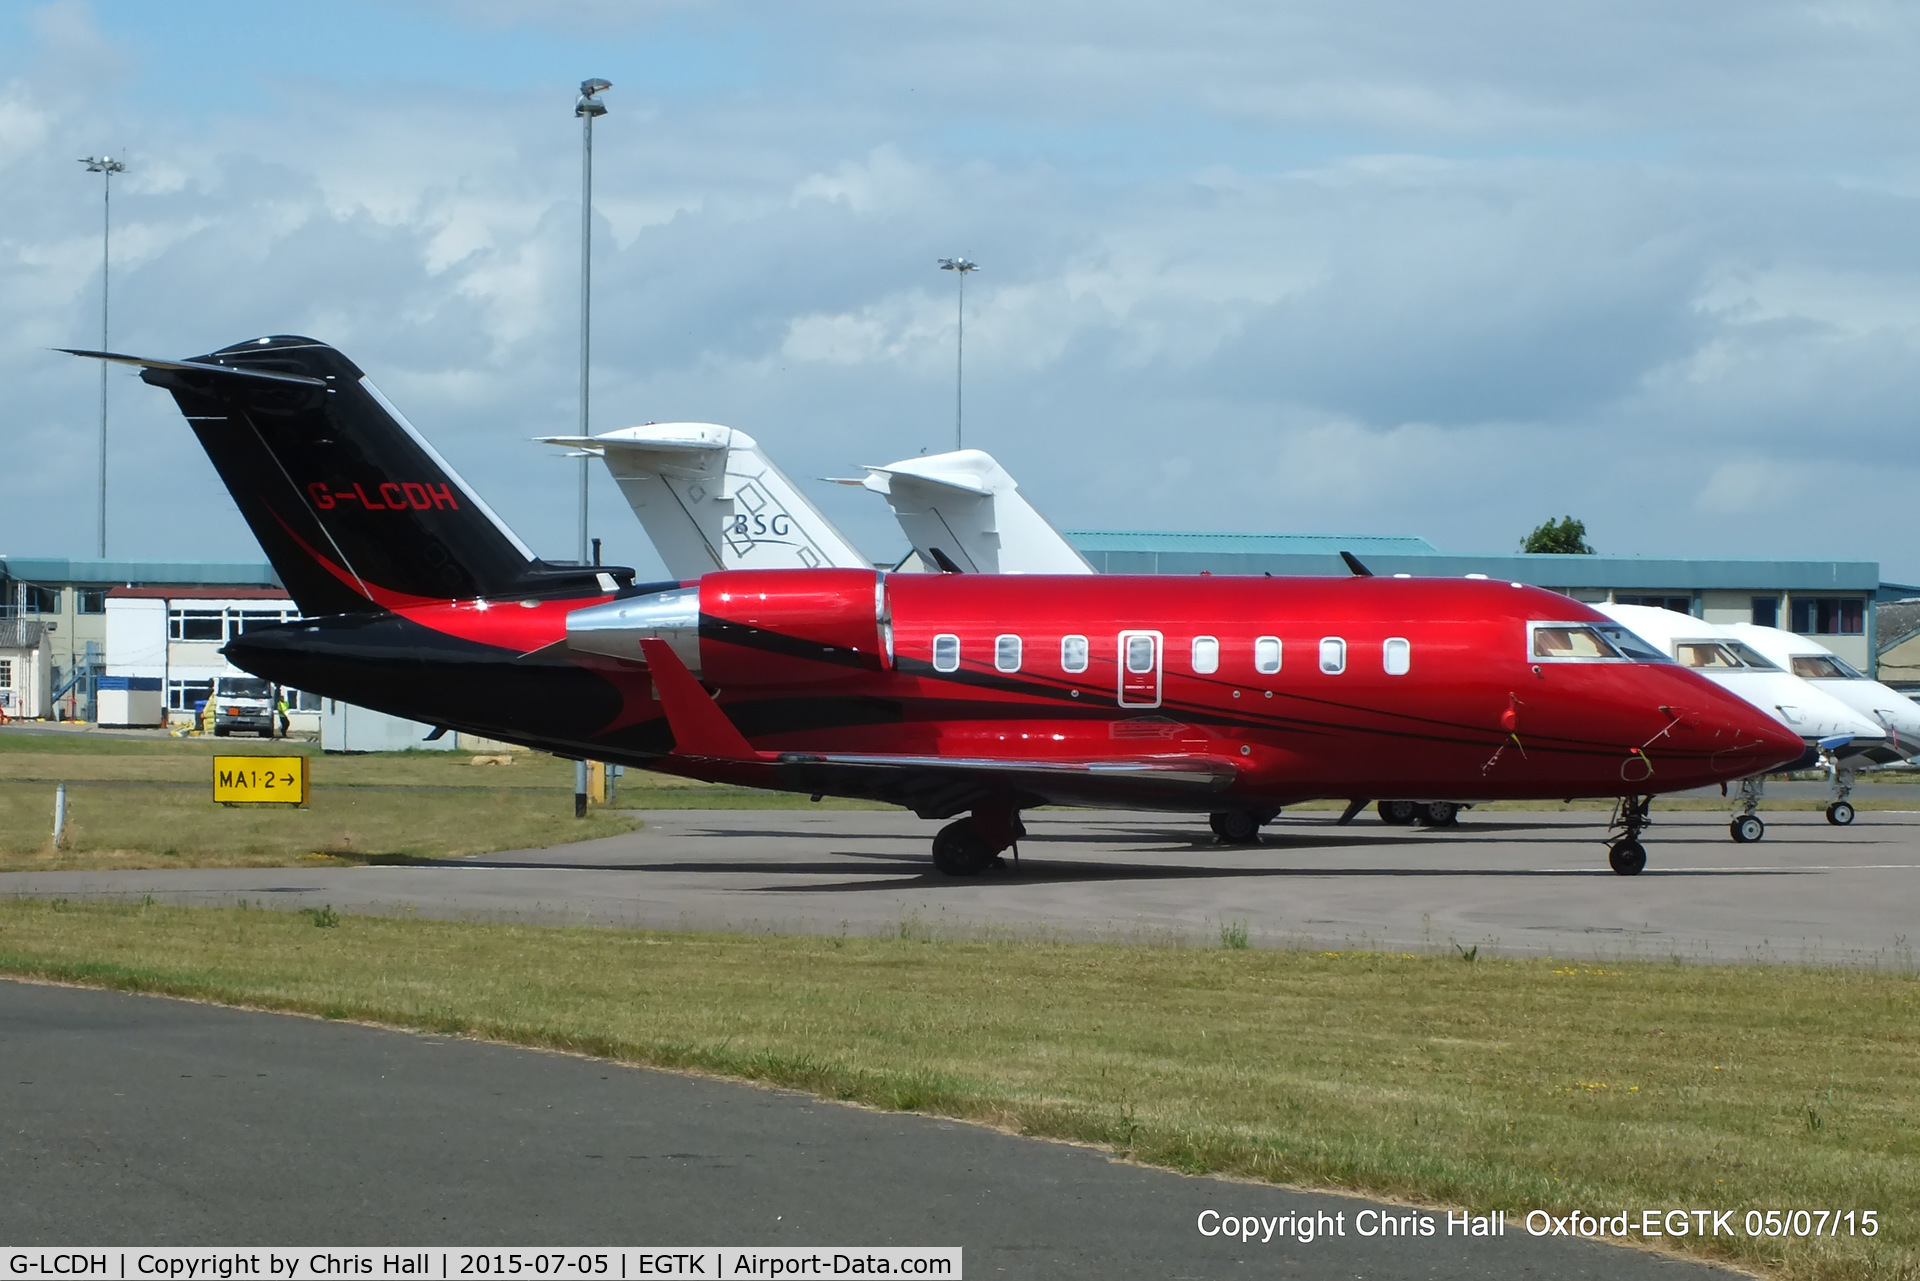 G-LCDH, 2012 Bombardier Challenger 605 (CL-600-2B16) C/N 5904, Owned by British Formula 1 Racing Driver Lewis Hamilton.